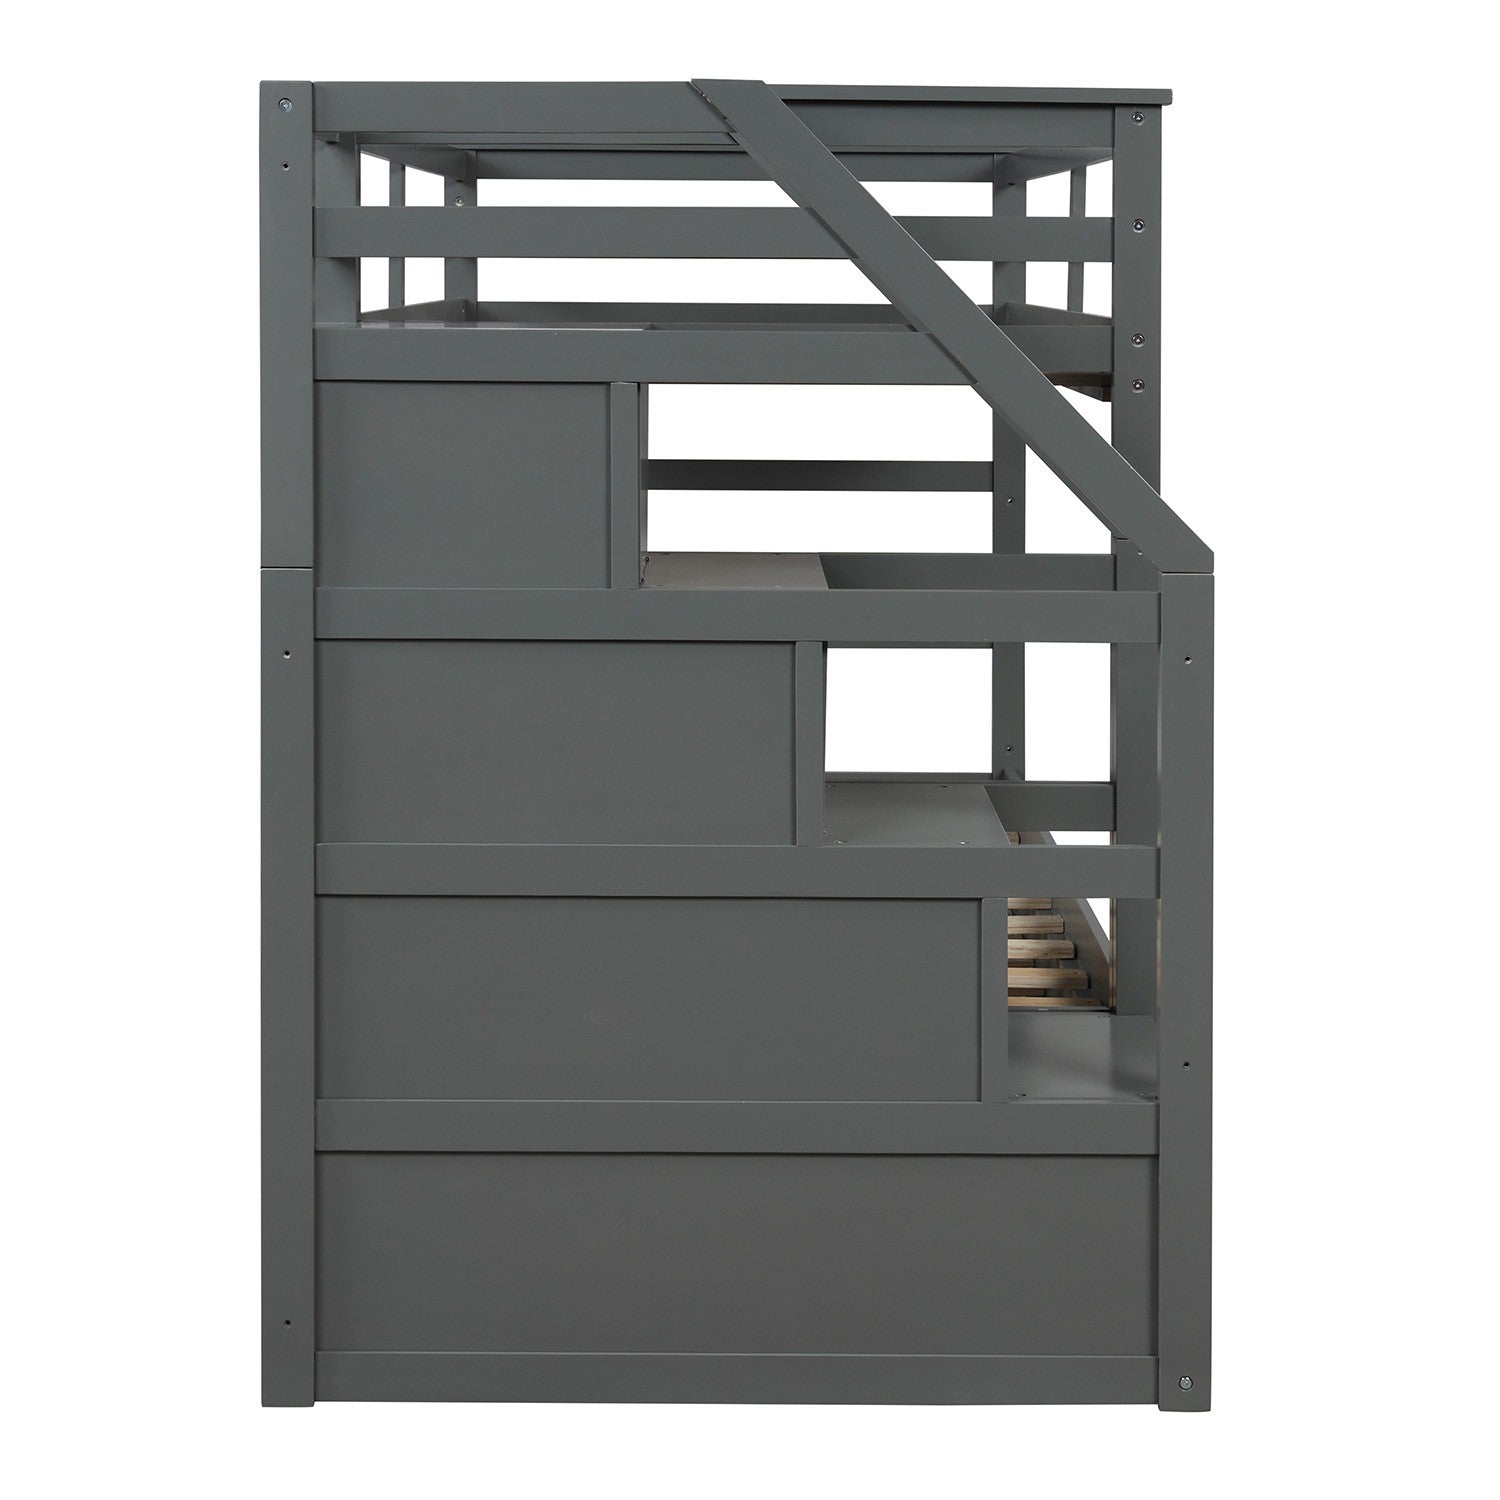 Gray Twin Over Twin Bunk Bed with Trundle